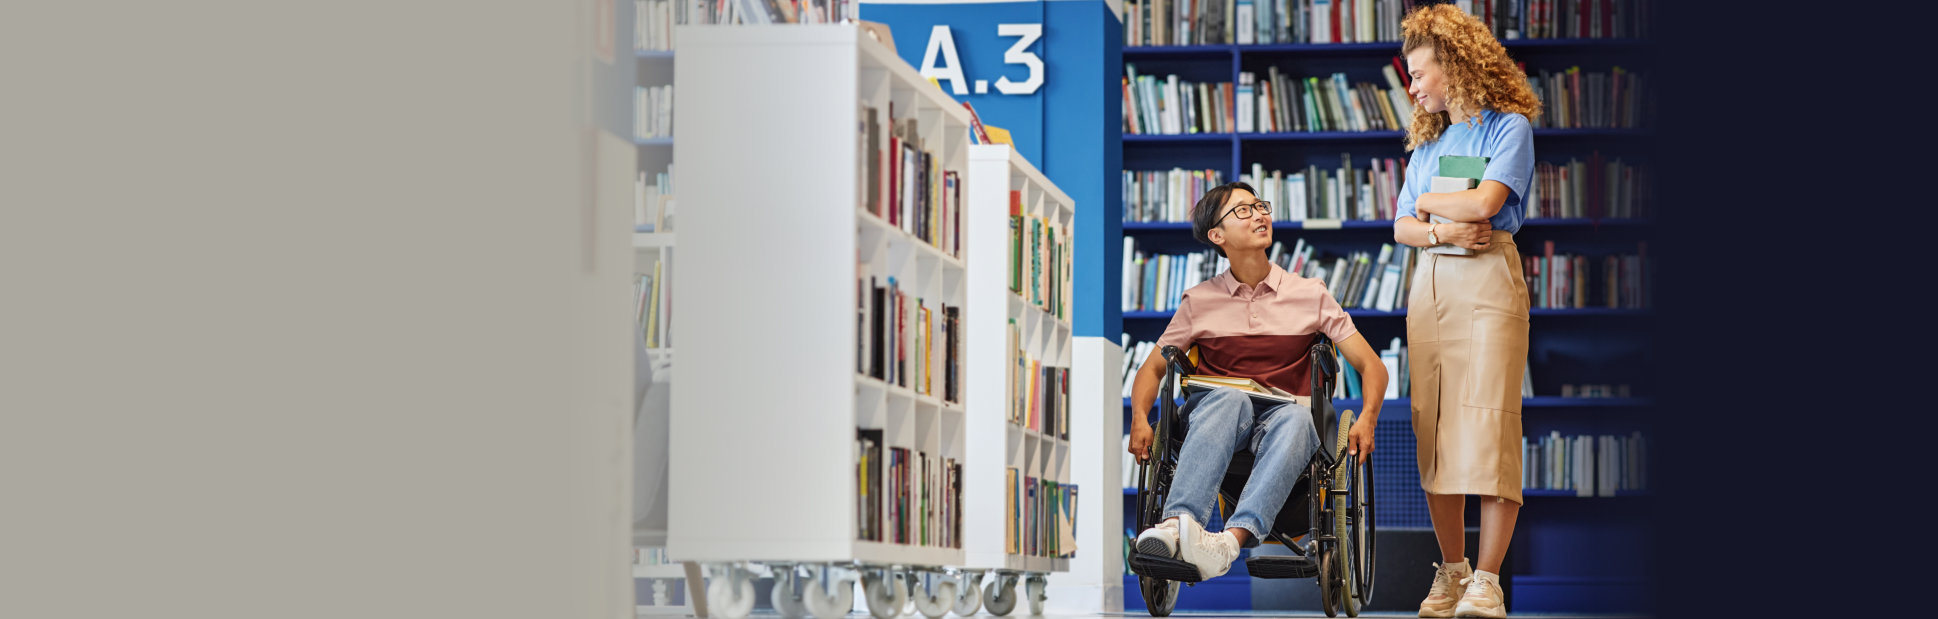 young man with disability using accessible college library and talking to friend